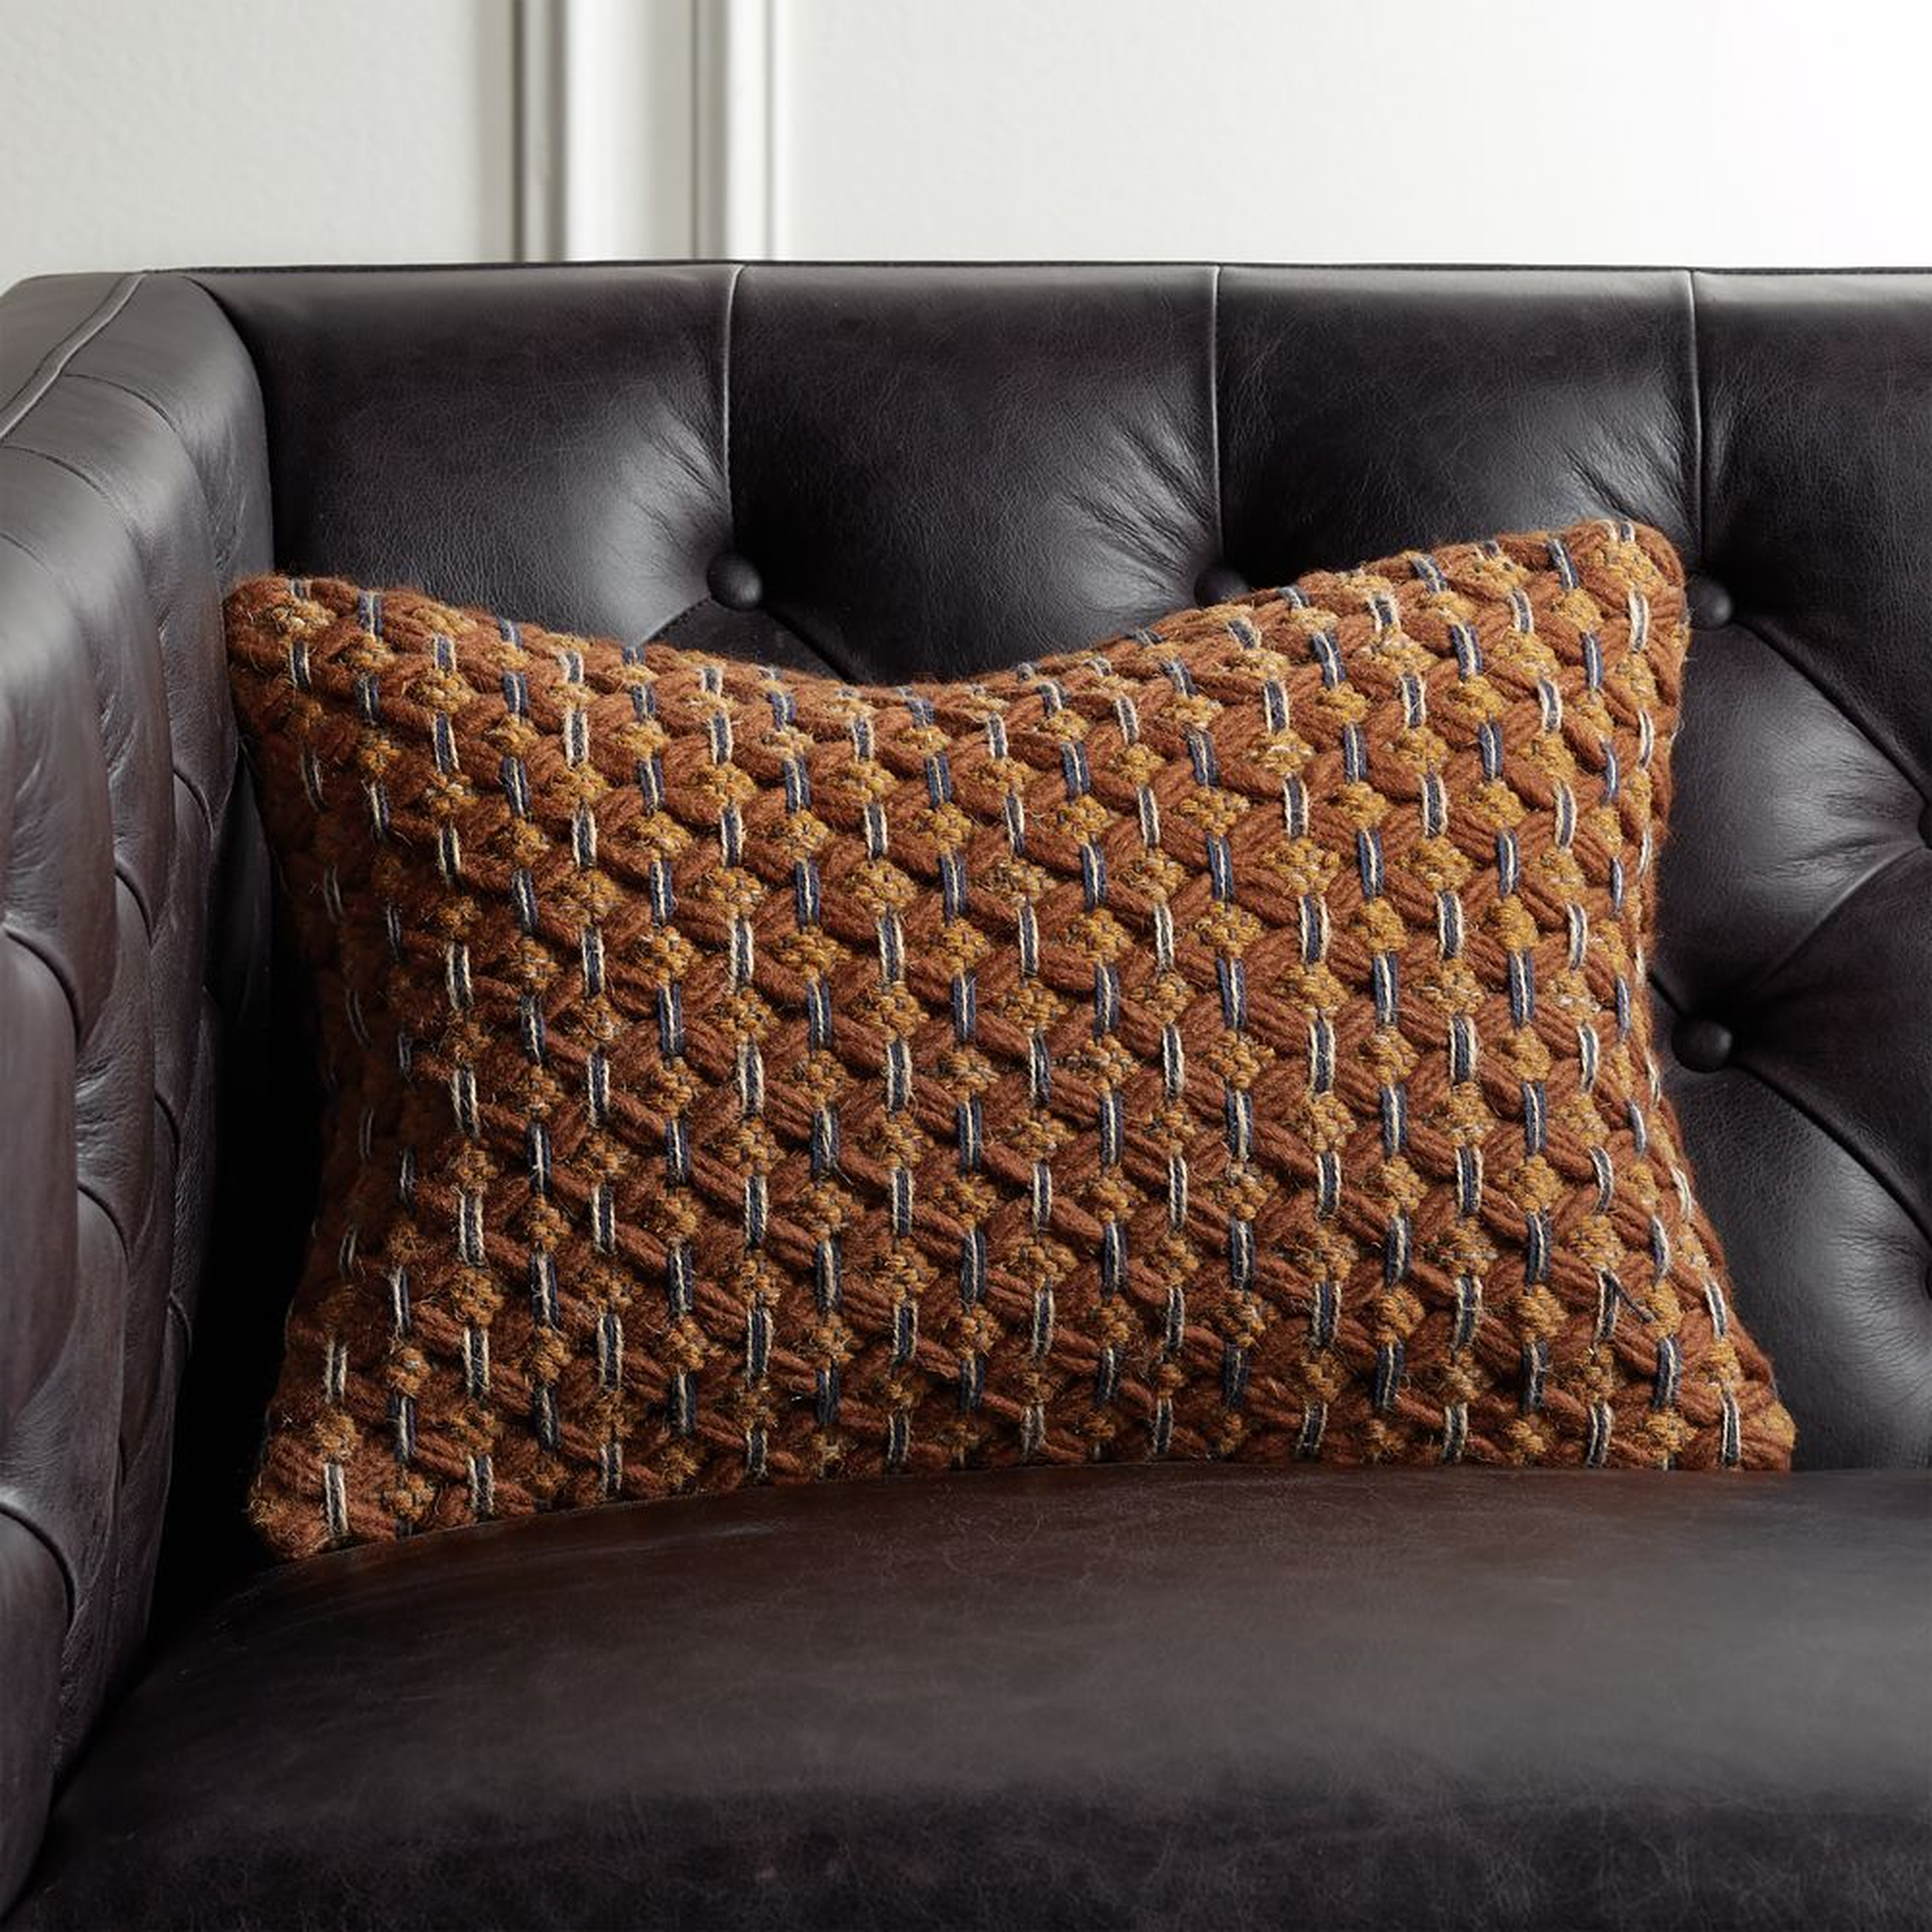 18"x12" Geema Copper Woven Pillow with Feather-Down Insert - CB2